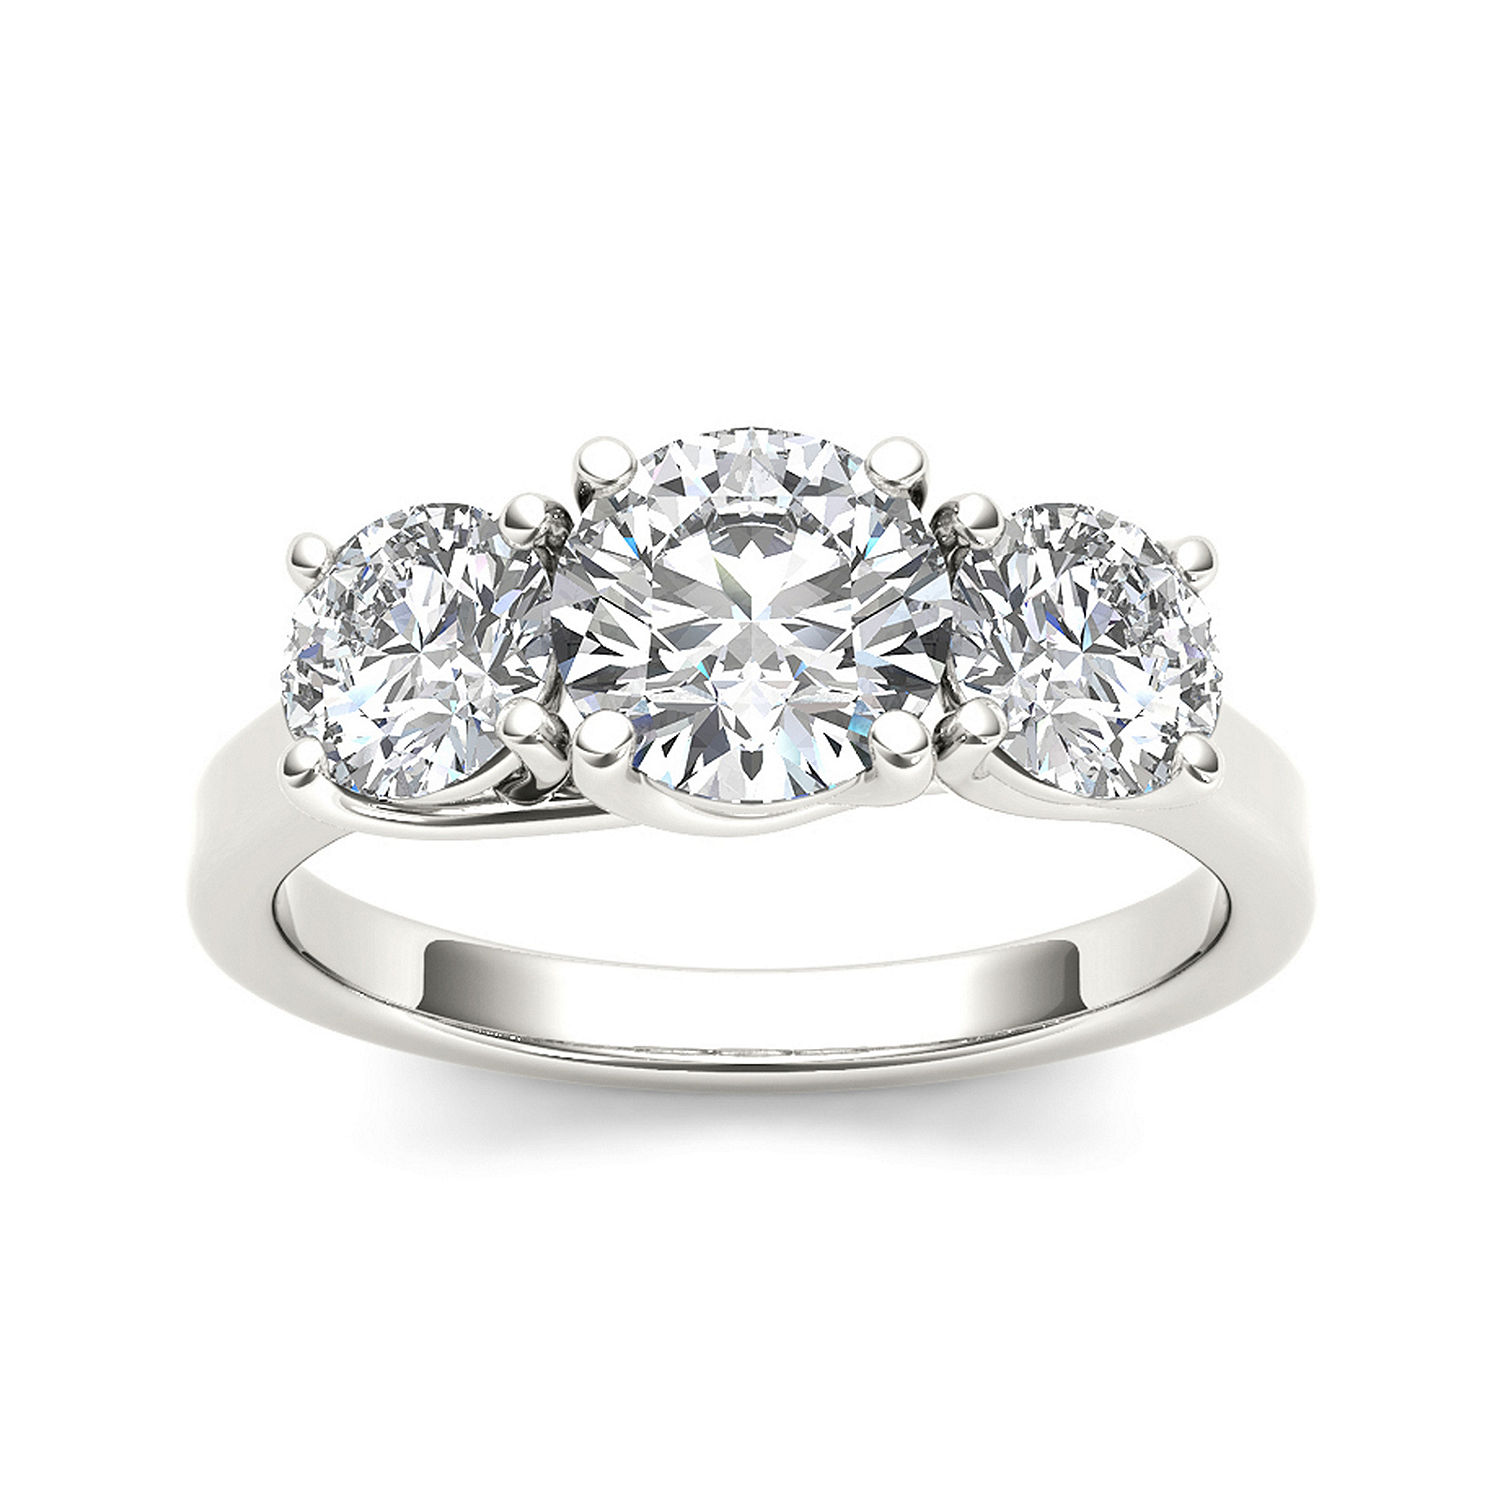 2 CT. T.W. Diamond 14K White Gold 3-Stone Engagement Ring, Color: White ...